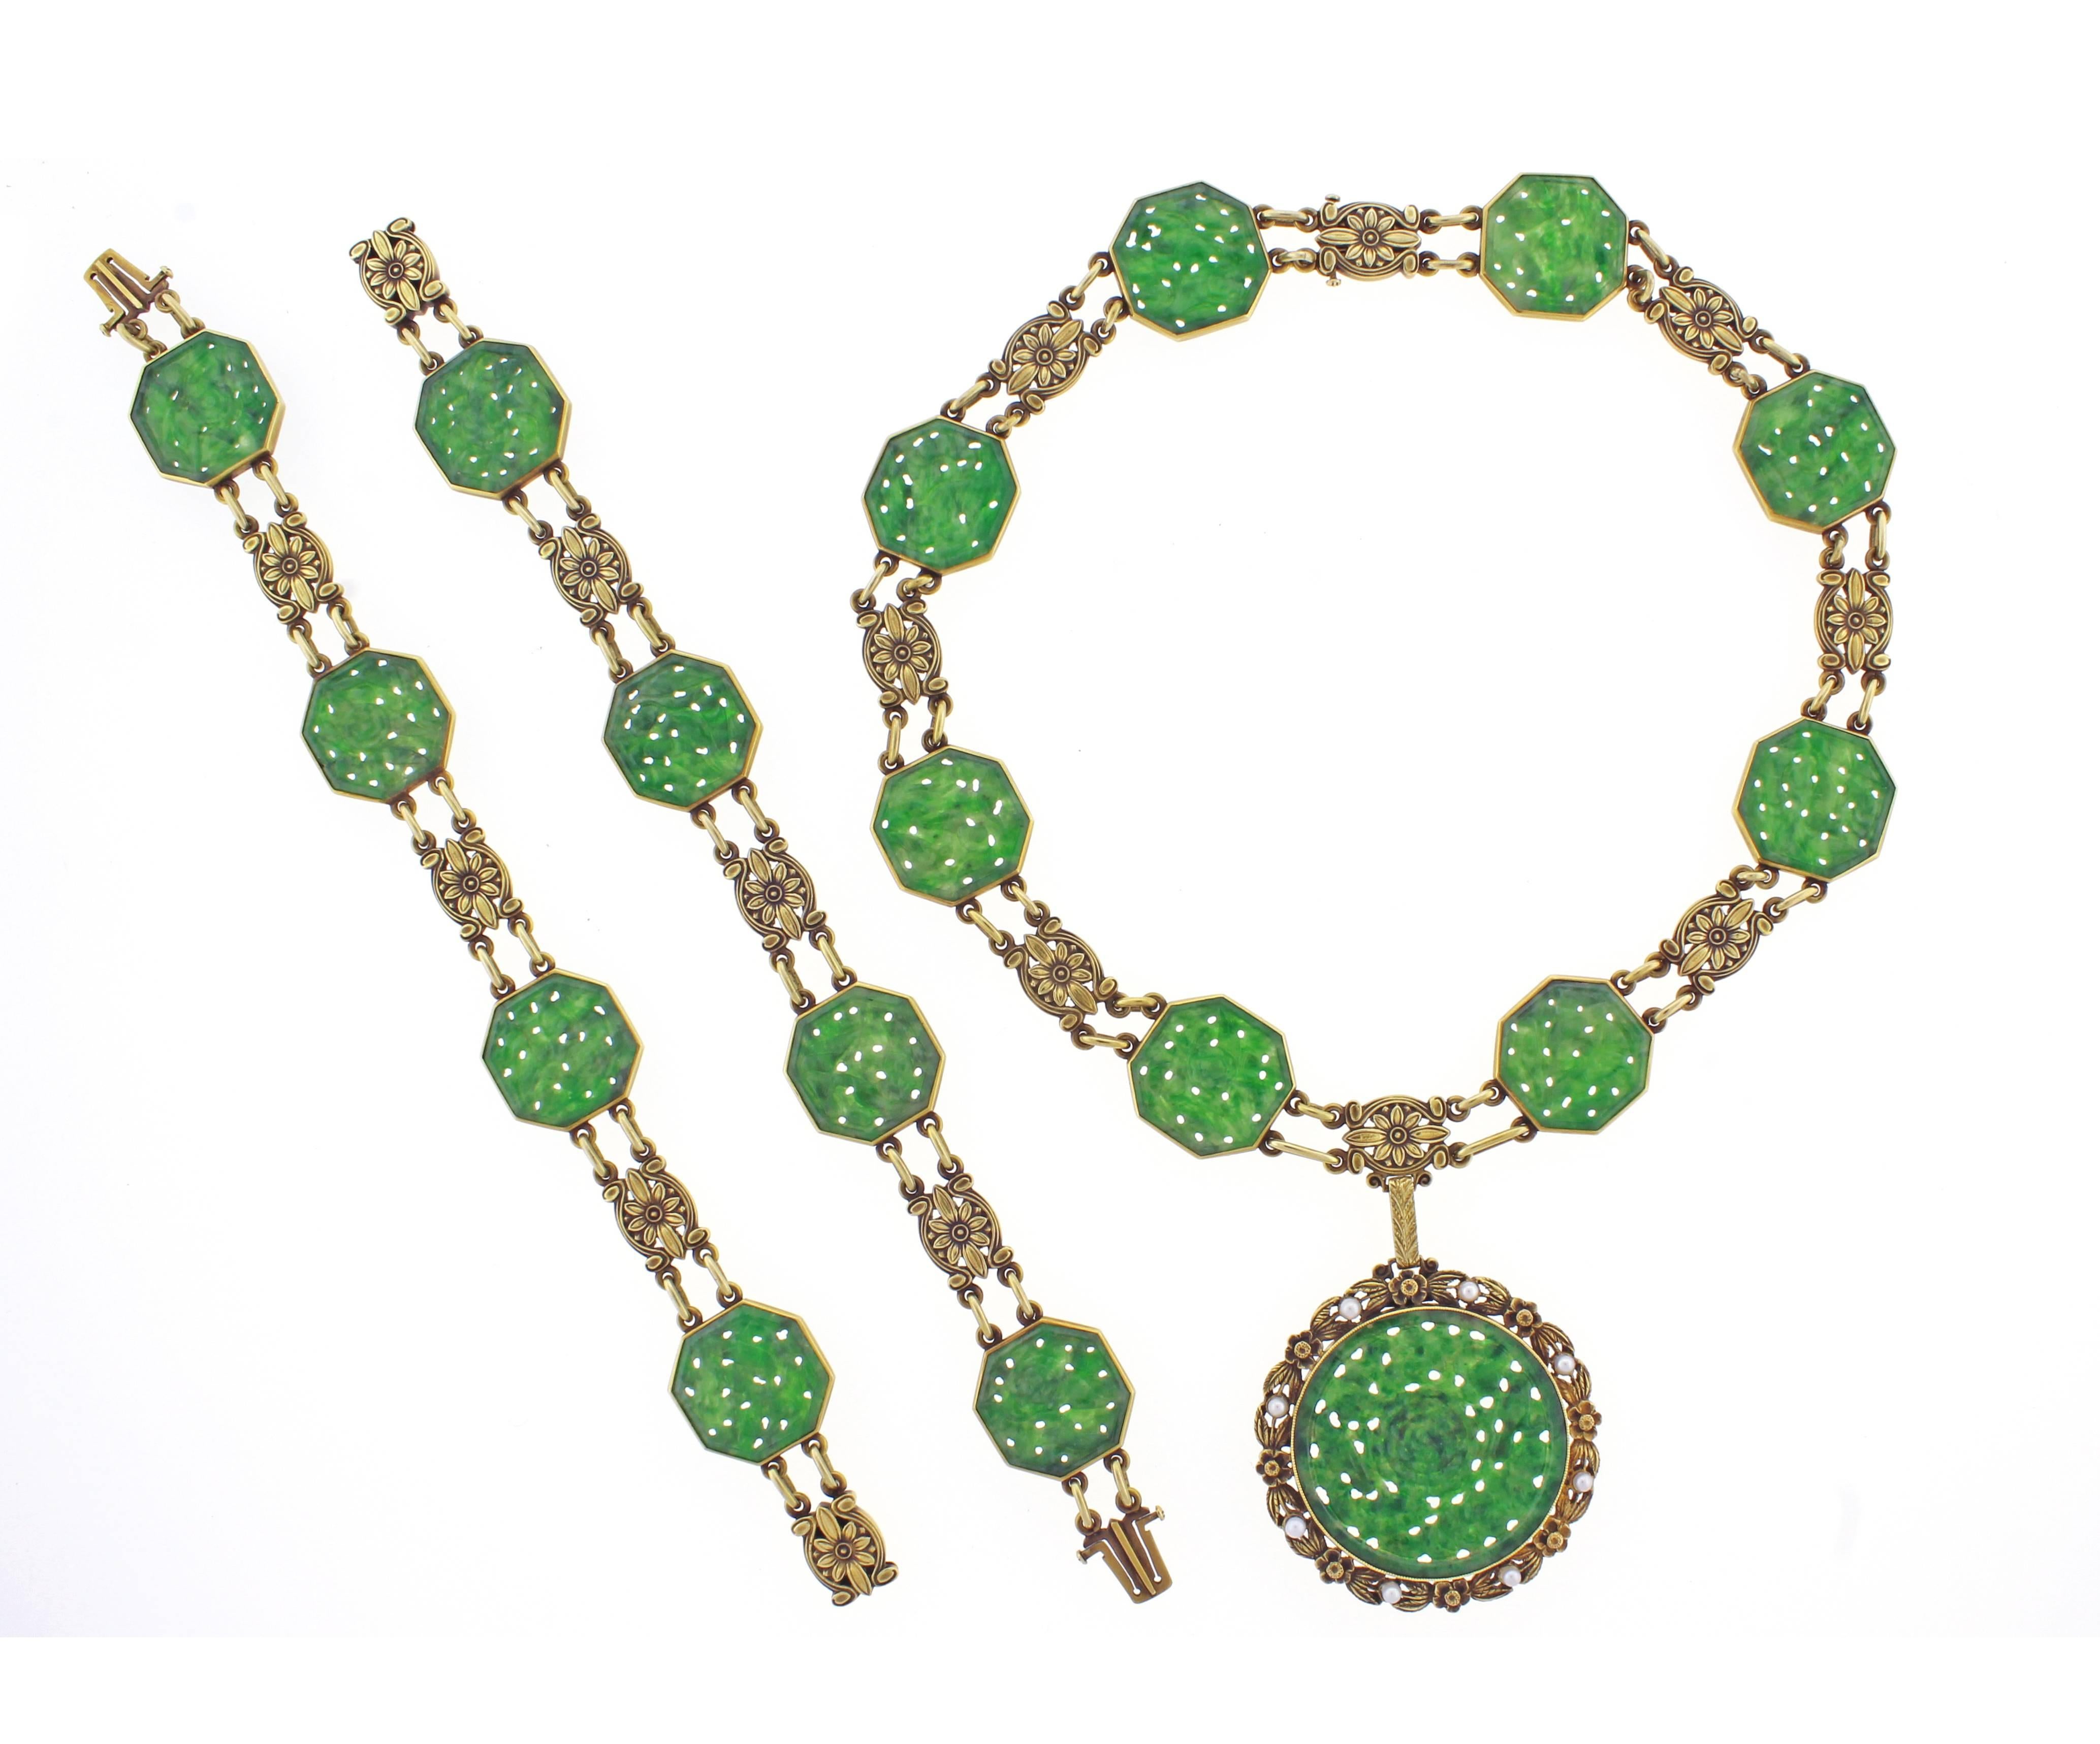 From Tiffany & Co., this extremely rare Art Nouveau Jade Sautoir. The 18 karat sautoir necklace comes apart to become two bracelets and a necklace or one bracelet and a longer necklace. The fully assembled necklace is 30.5 inches long, the two